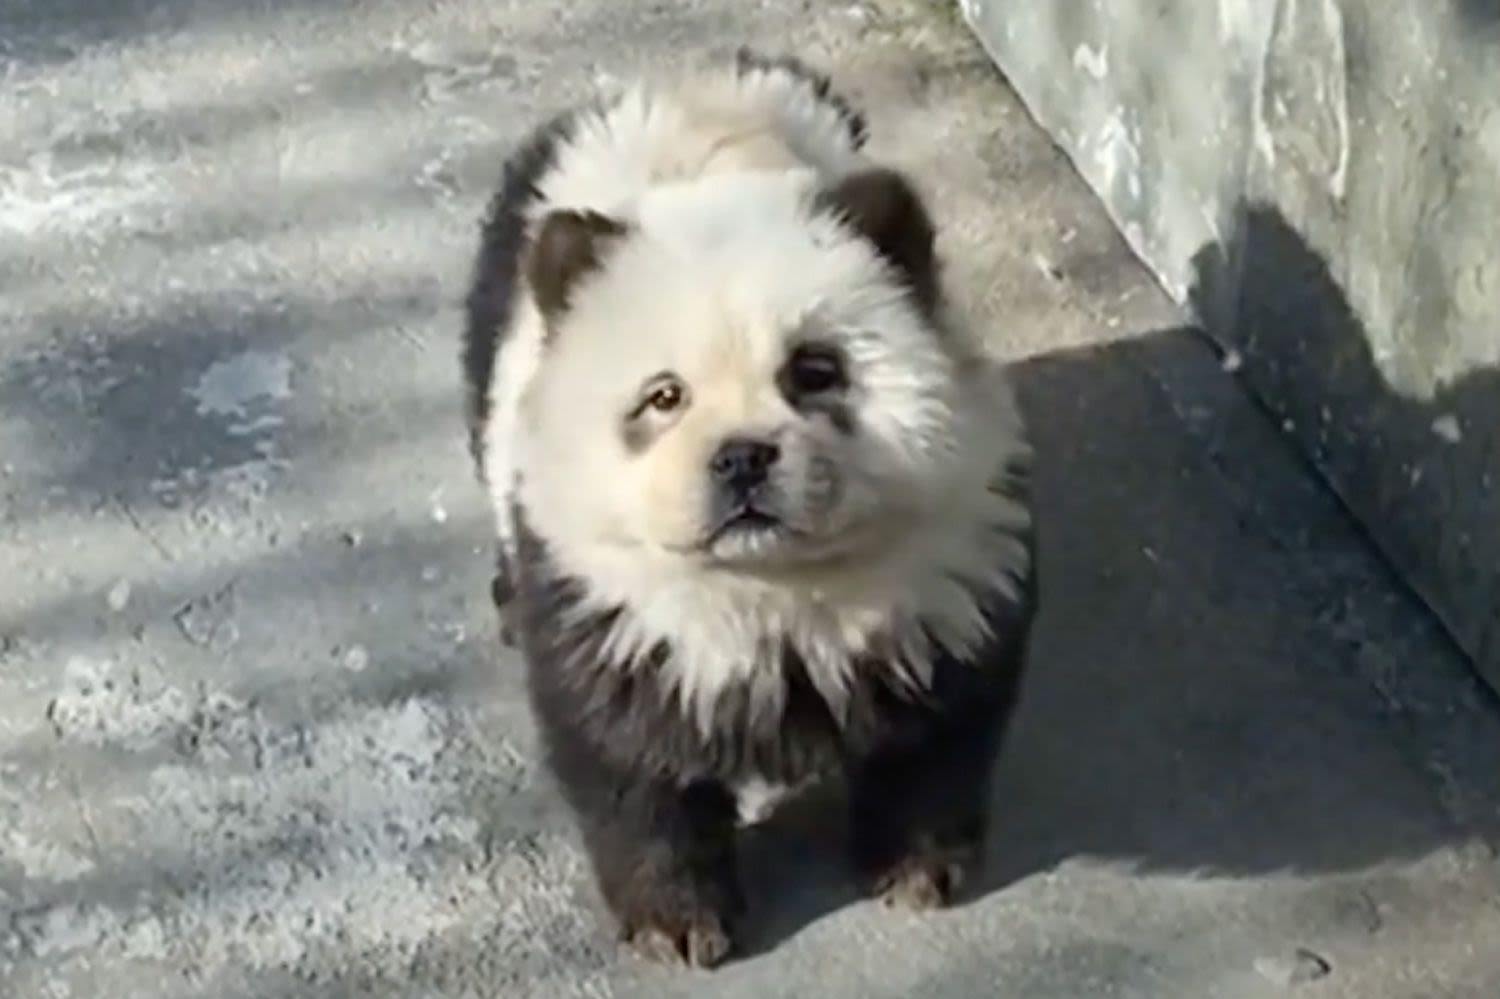 Zoo Dyes Chow Chow Dogs to Look like Pandas and Exhibits the Pups as 'Panda Dogs'